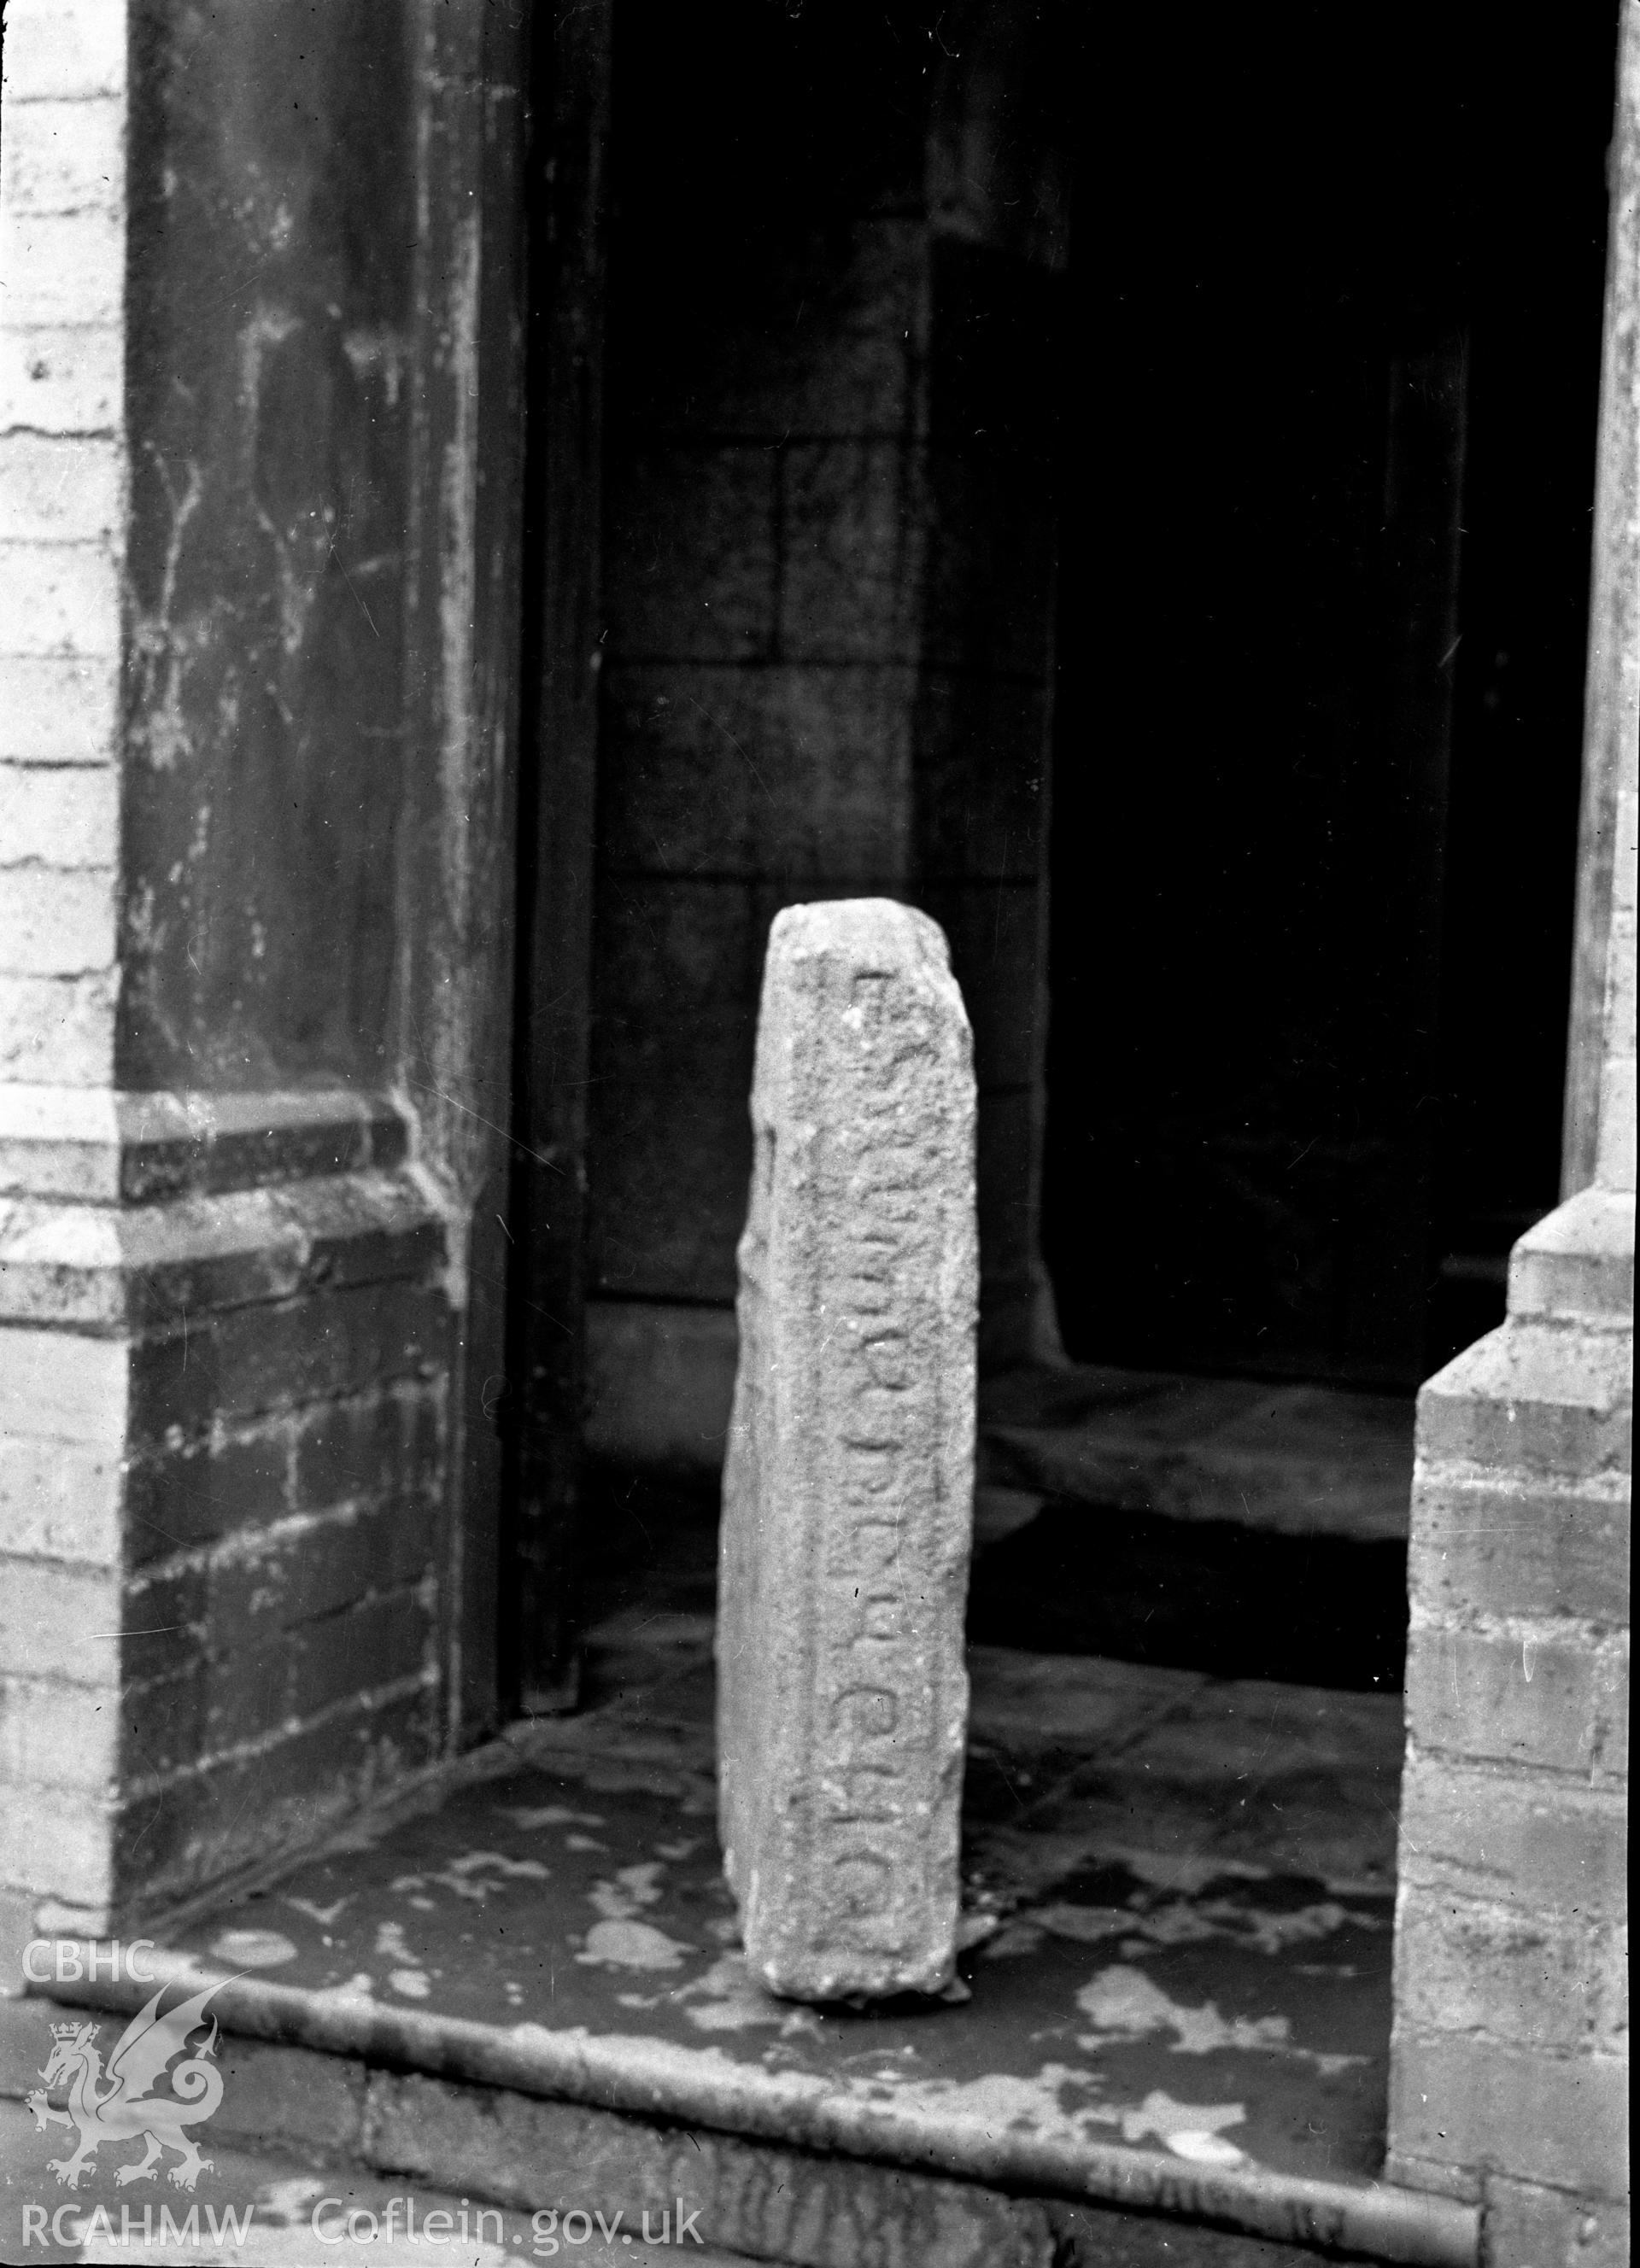 Digital copy of a nitrate negative showing an inscribed stone in the chapel on Bardsey Island. Transcript of reverse of black and white photograph: 'Bardsey Island / Caernarvon / 57 x 6.' From the Cadw Monuments in Care Collection.